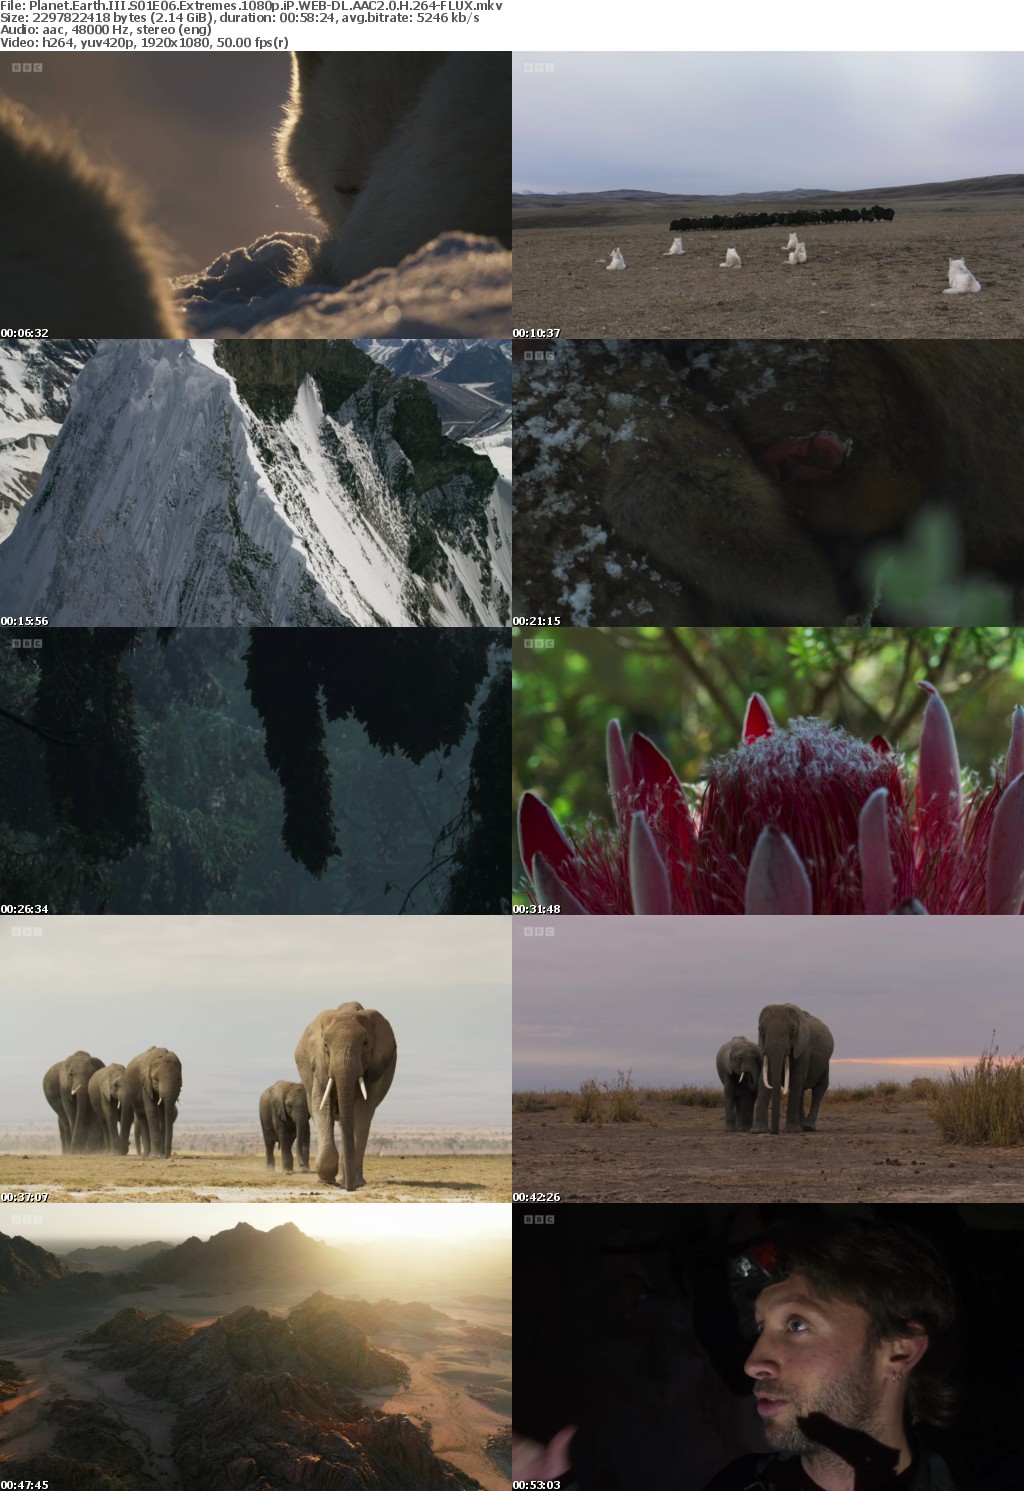 Planet Earth III S01E06 Extremes 1080p iP WEB-DL AAC2 0 H 264-FLUX